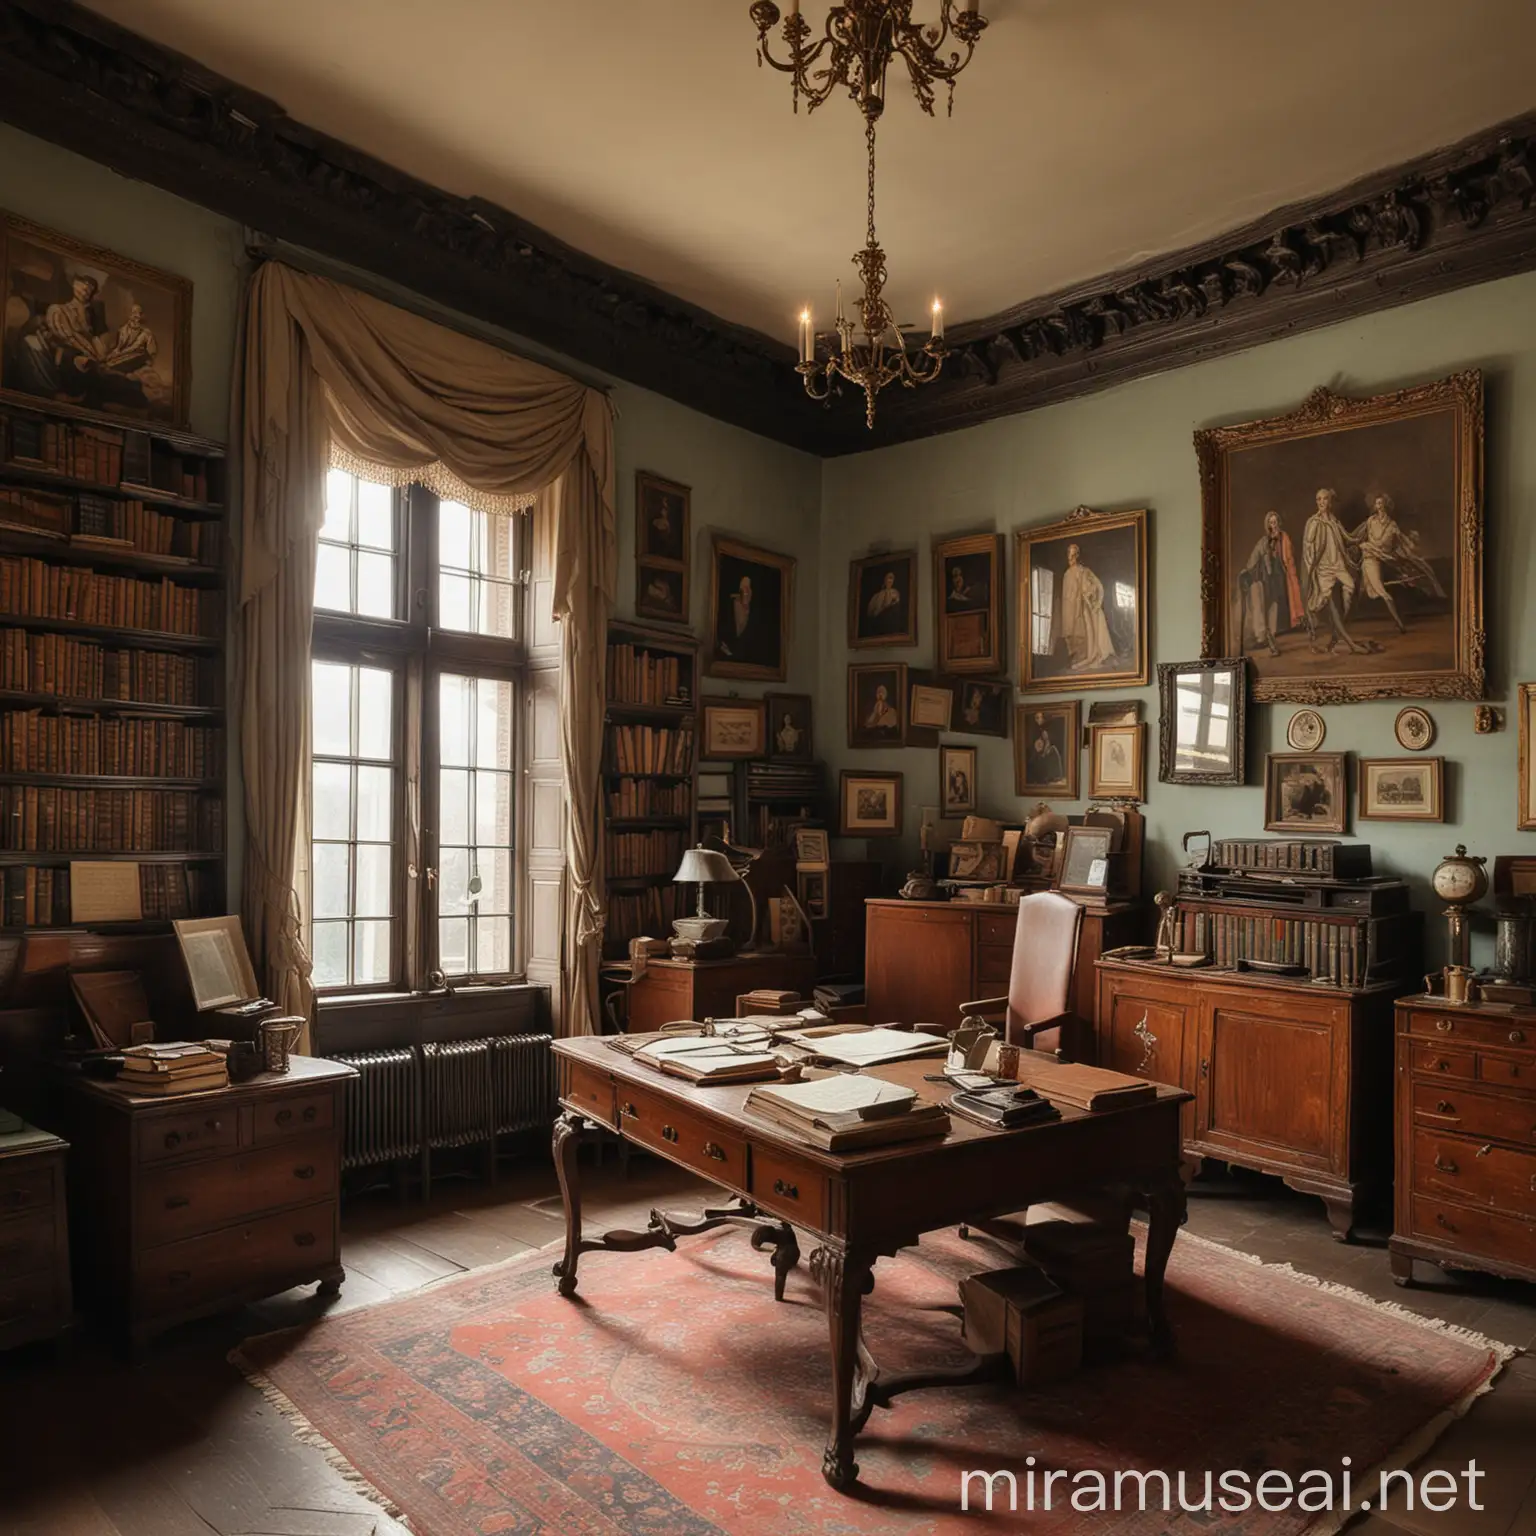 18th Century Scholar in His Lavish Office Surrounded by Books and Antiques